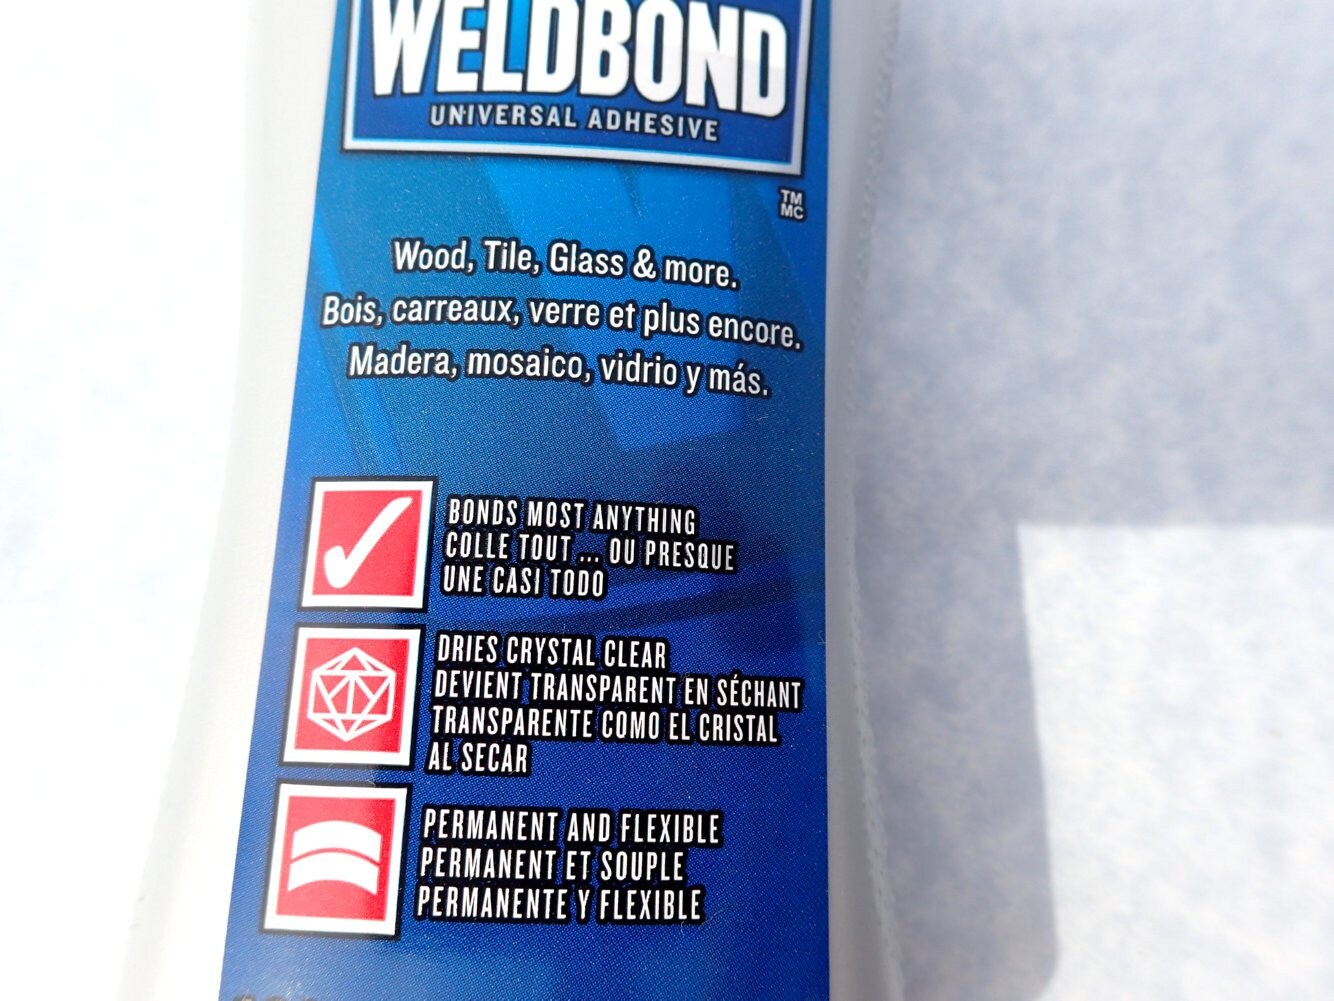 Weldbond 5.4 oz - Adhesive for Mosaics and Crafts - Clear Drying Sealant